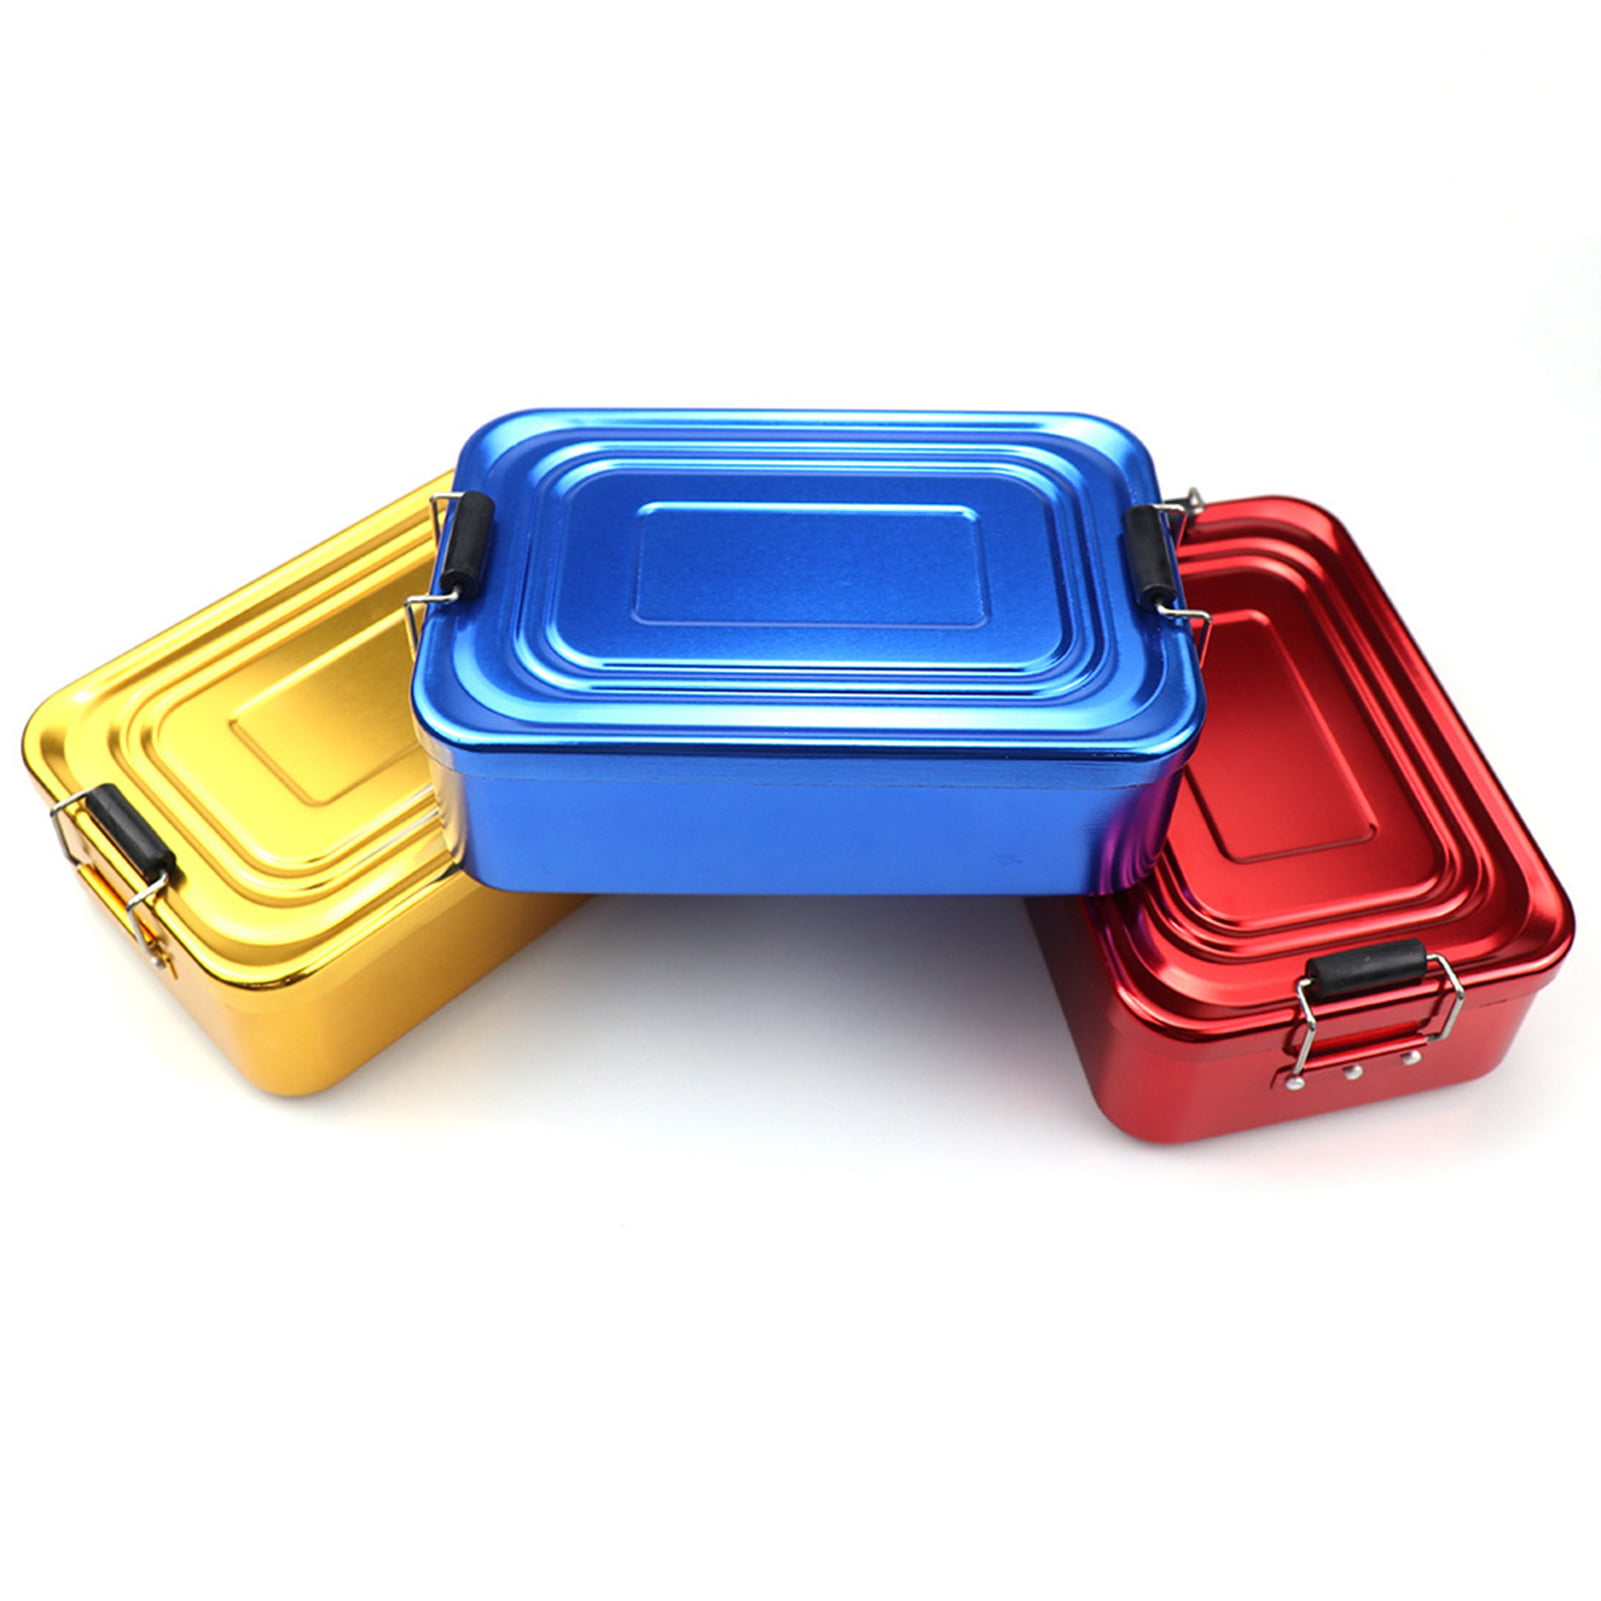 Cheers.US Portable Stainless Steel Lunch Box for Kids girls